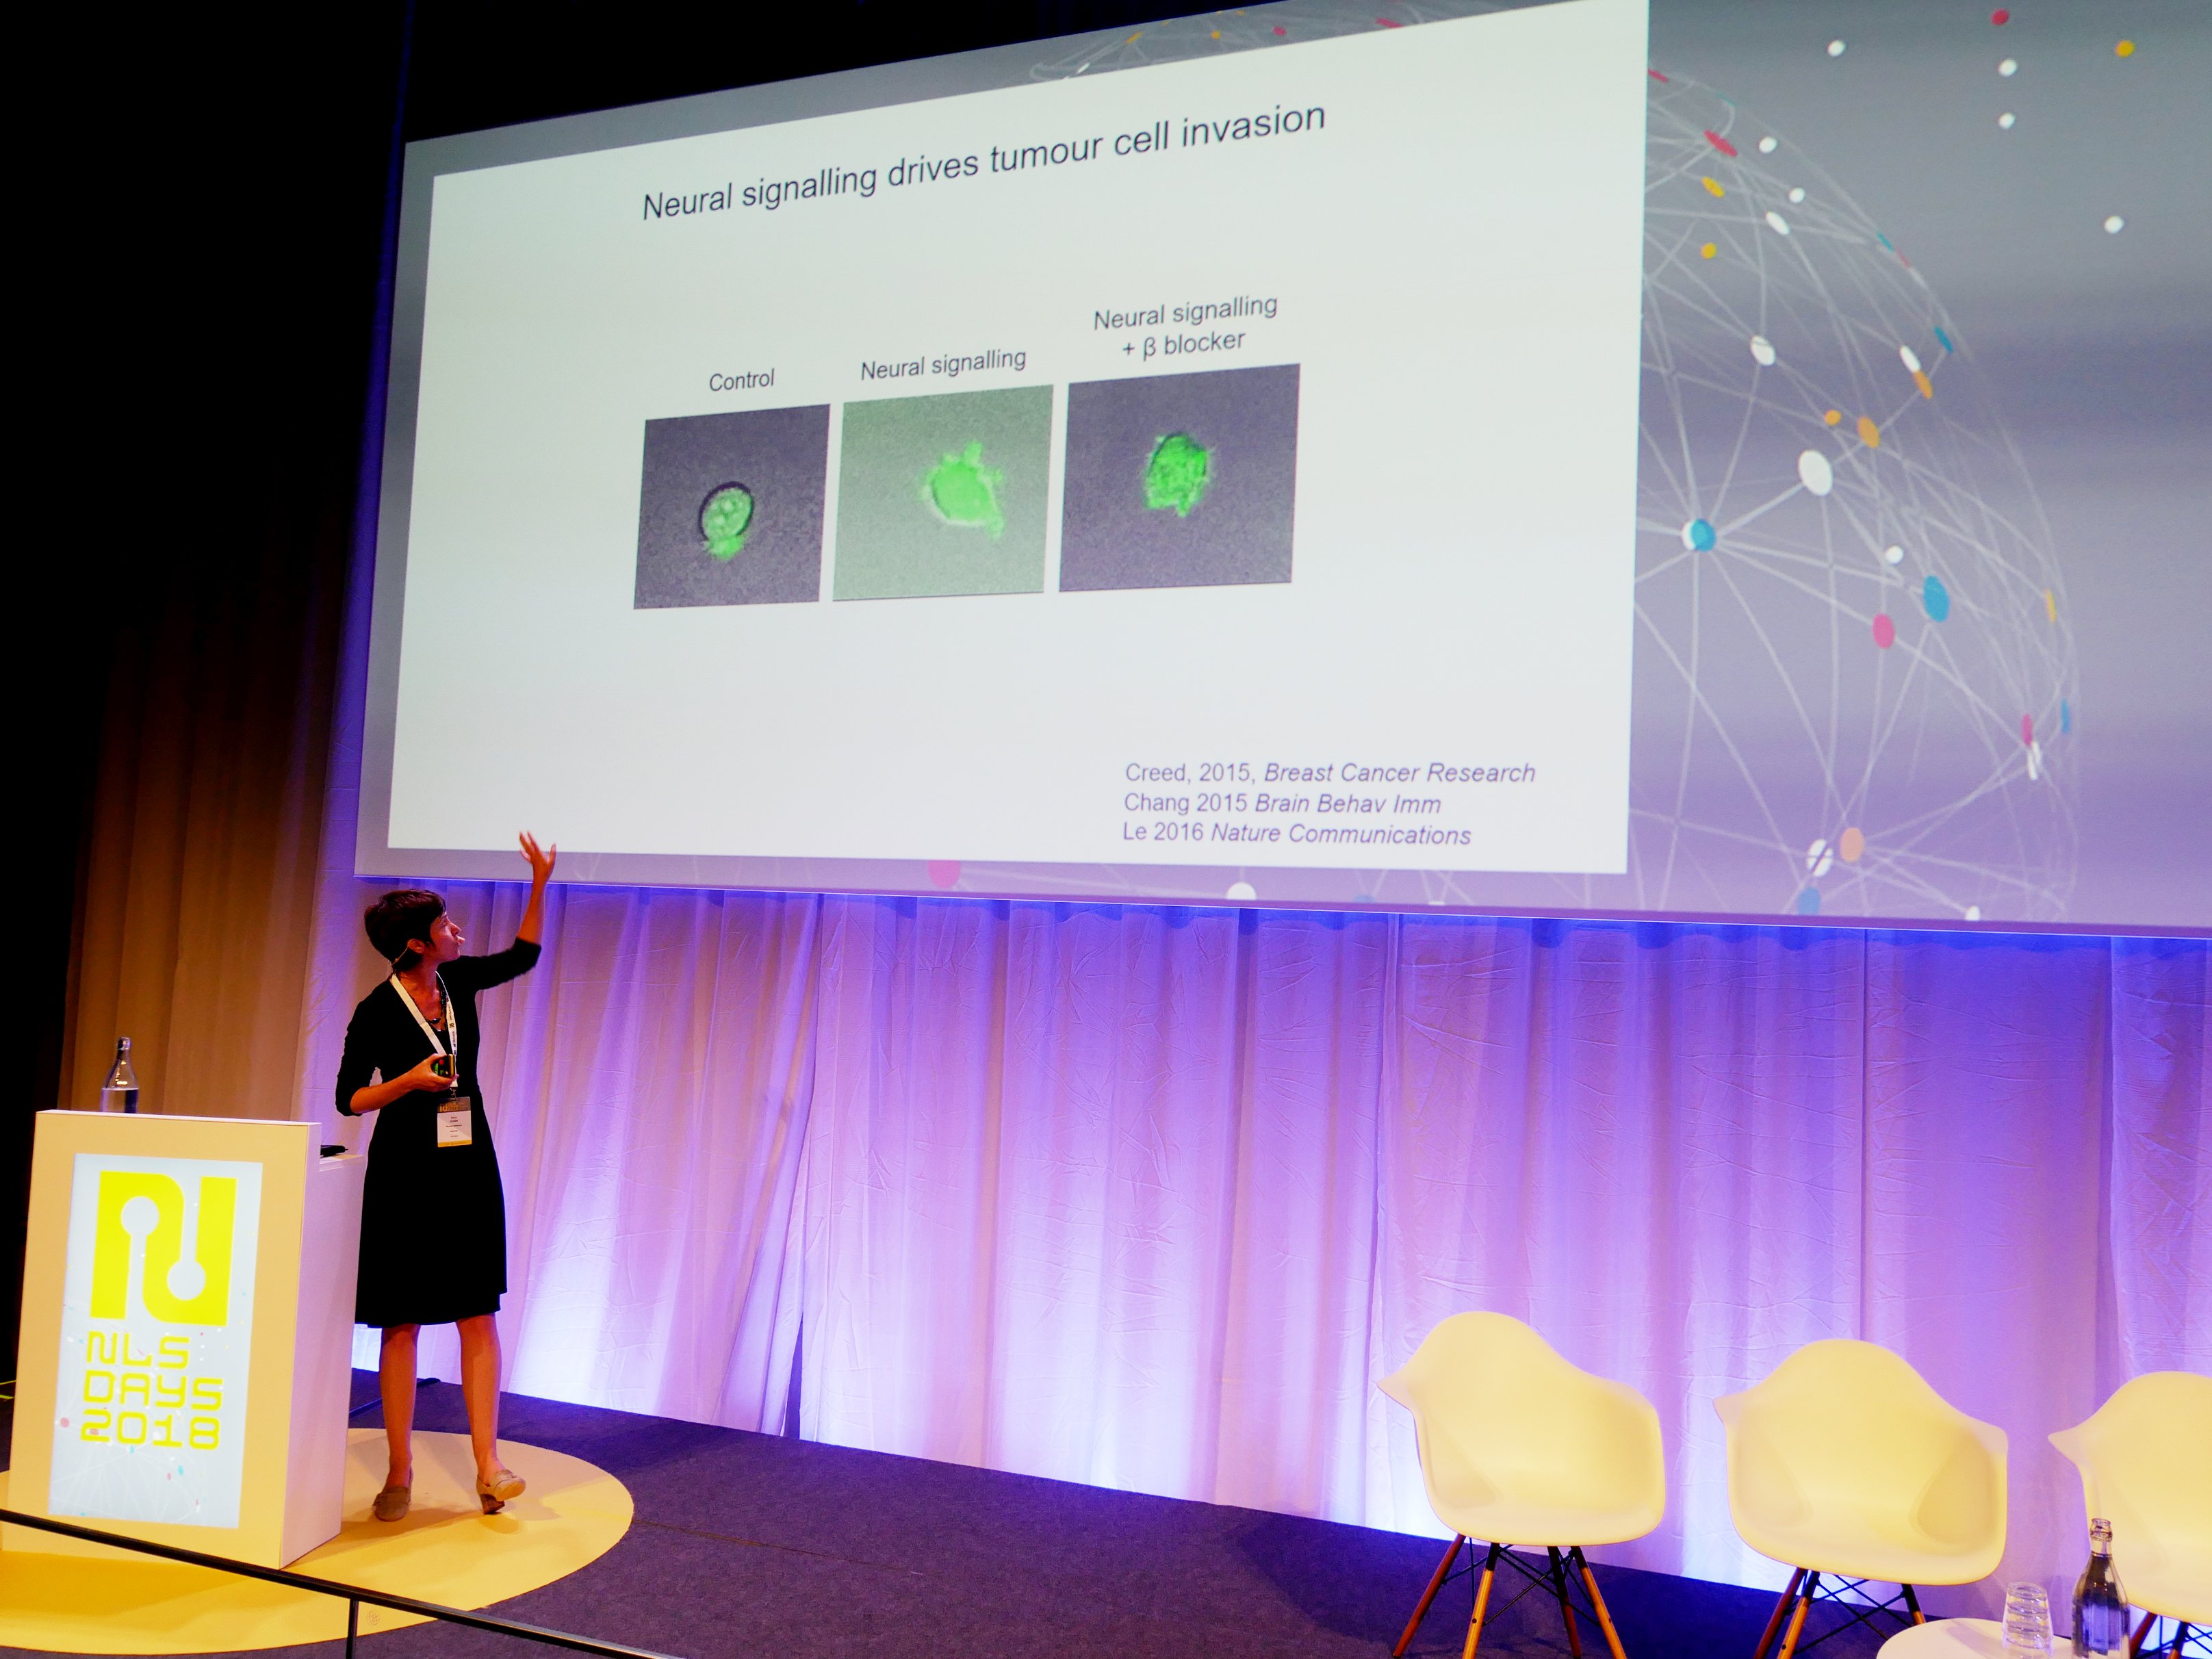 Erica Sloan is the group leader for the Cancer &amp; Neural-Immune Research Laboratory in Monash University, Australia. She gave an introduction to the effect of neural signalling on tumour cells during the NLSDays in Stockholm 2018.